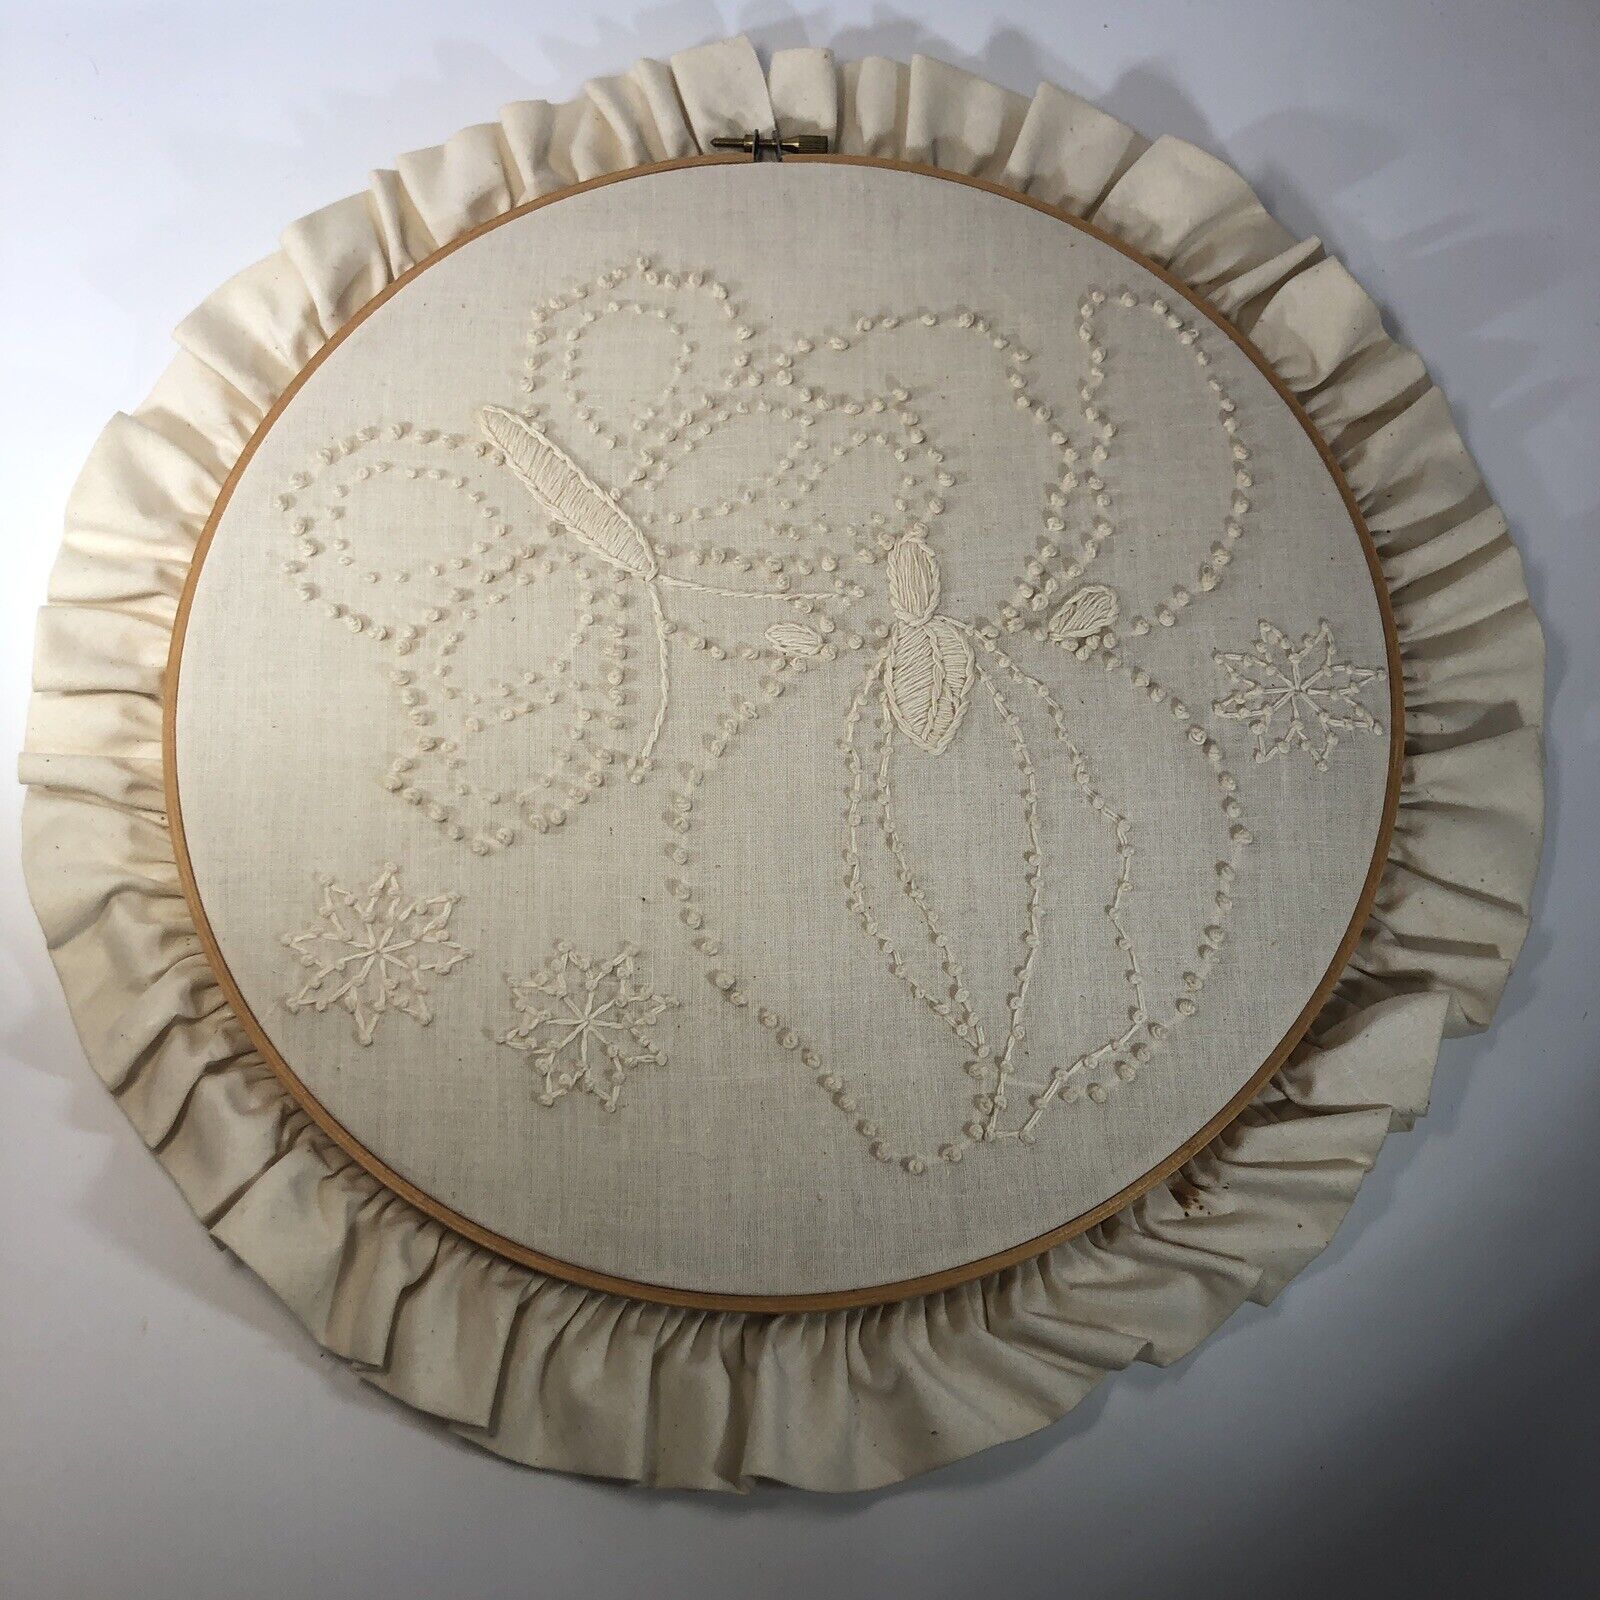 Vintage Finished Embroidery Hoop French Knot Butterfly Flowers 15”